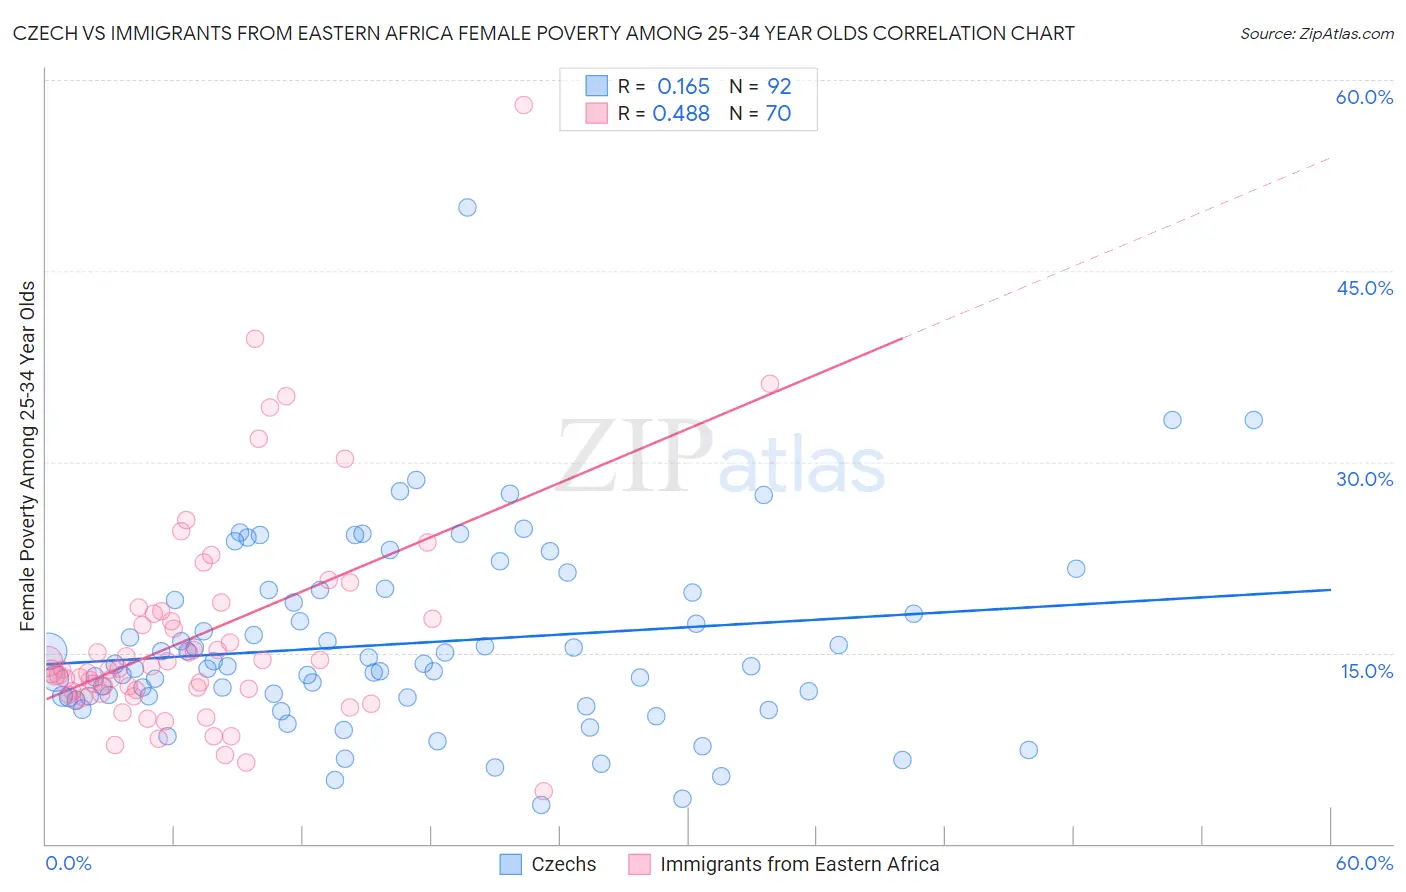 Czech vs Immigrants from Eastern Africa Female Poverty Among 25-34 Year Olds